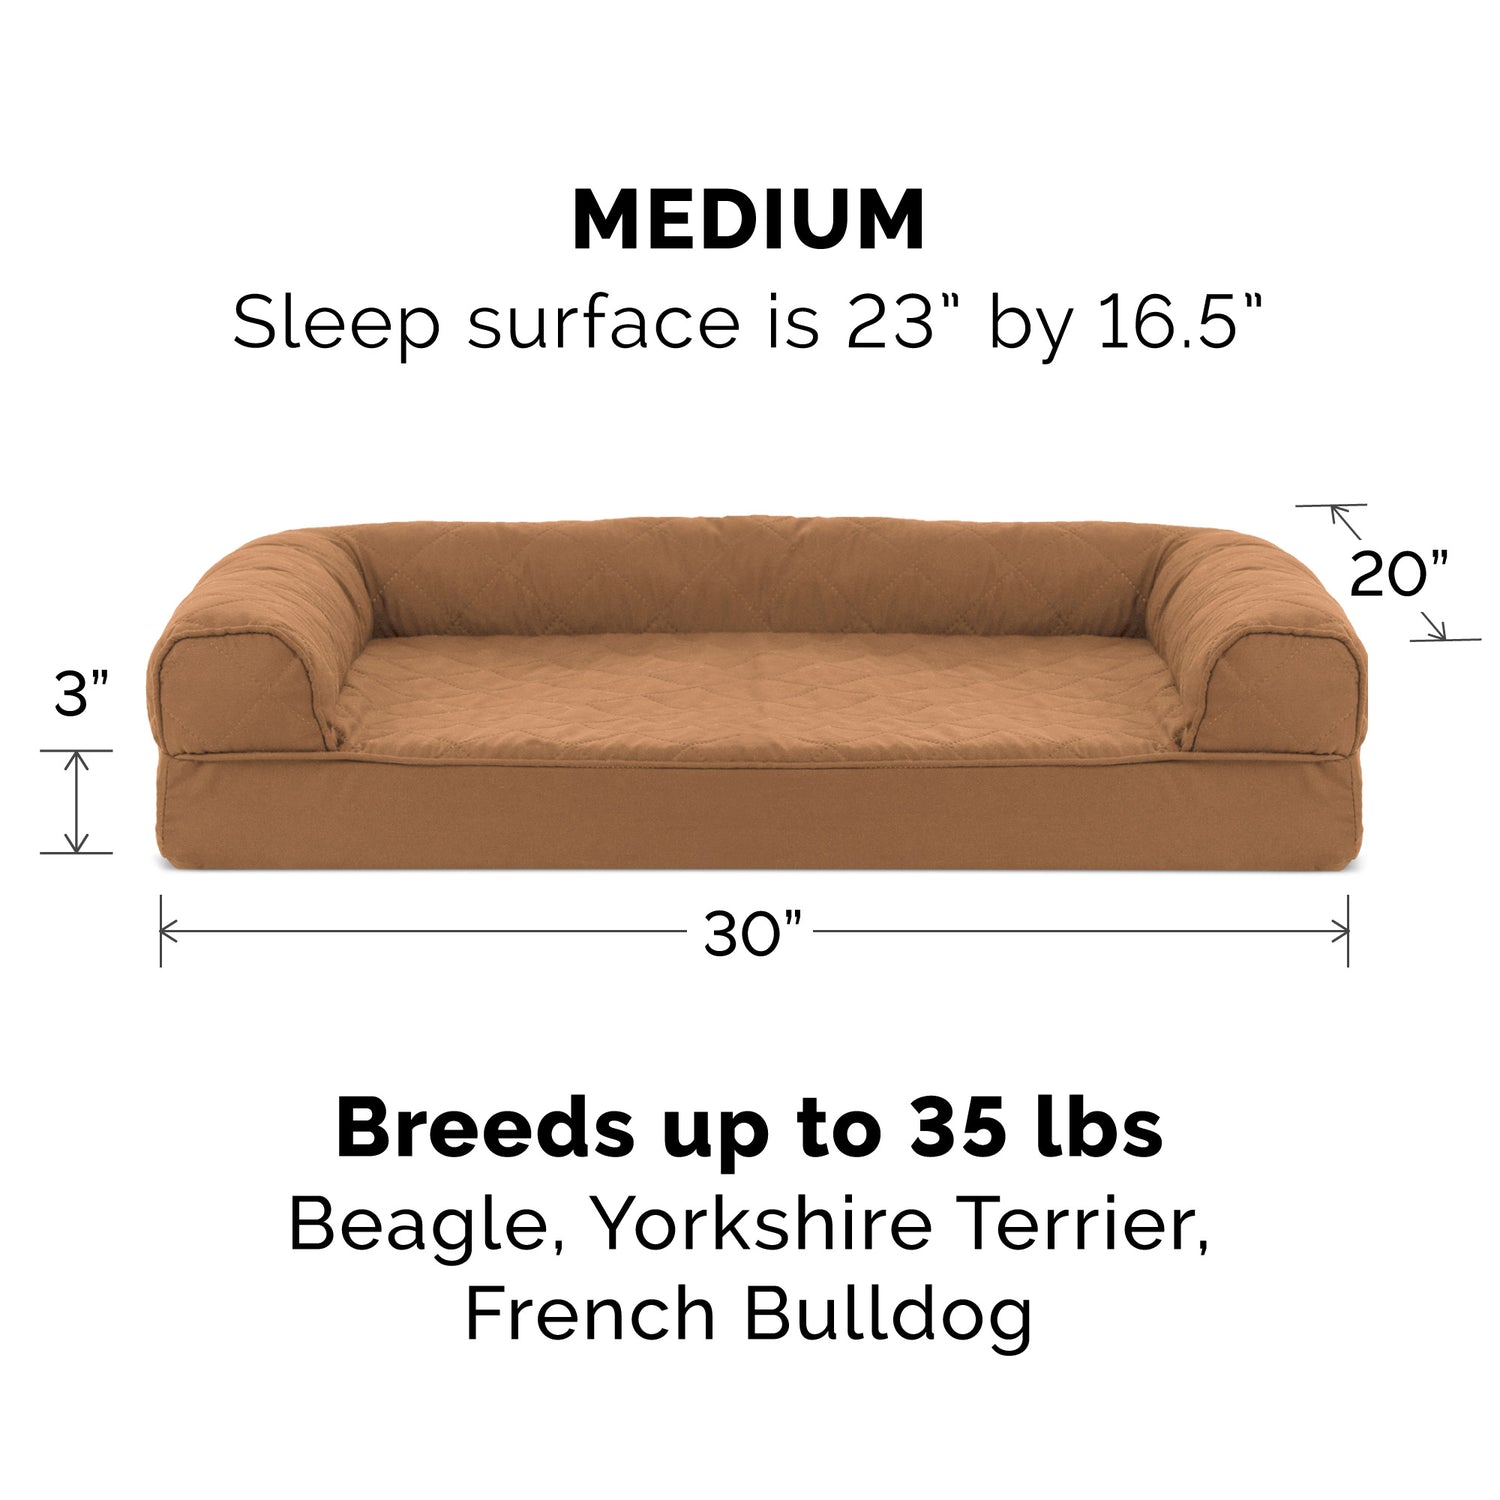 Furhaven Pet Products , Full Support Orthopedic Quilted Sofa-Style Couch Bed for Dogs & Cats, Toasted Brown, Medium Animals & Pet Supplies > Pet Supplies > Cat Supplies > Cat Beds FurHaven Pet   